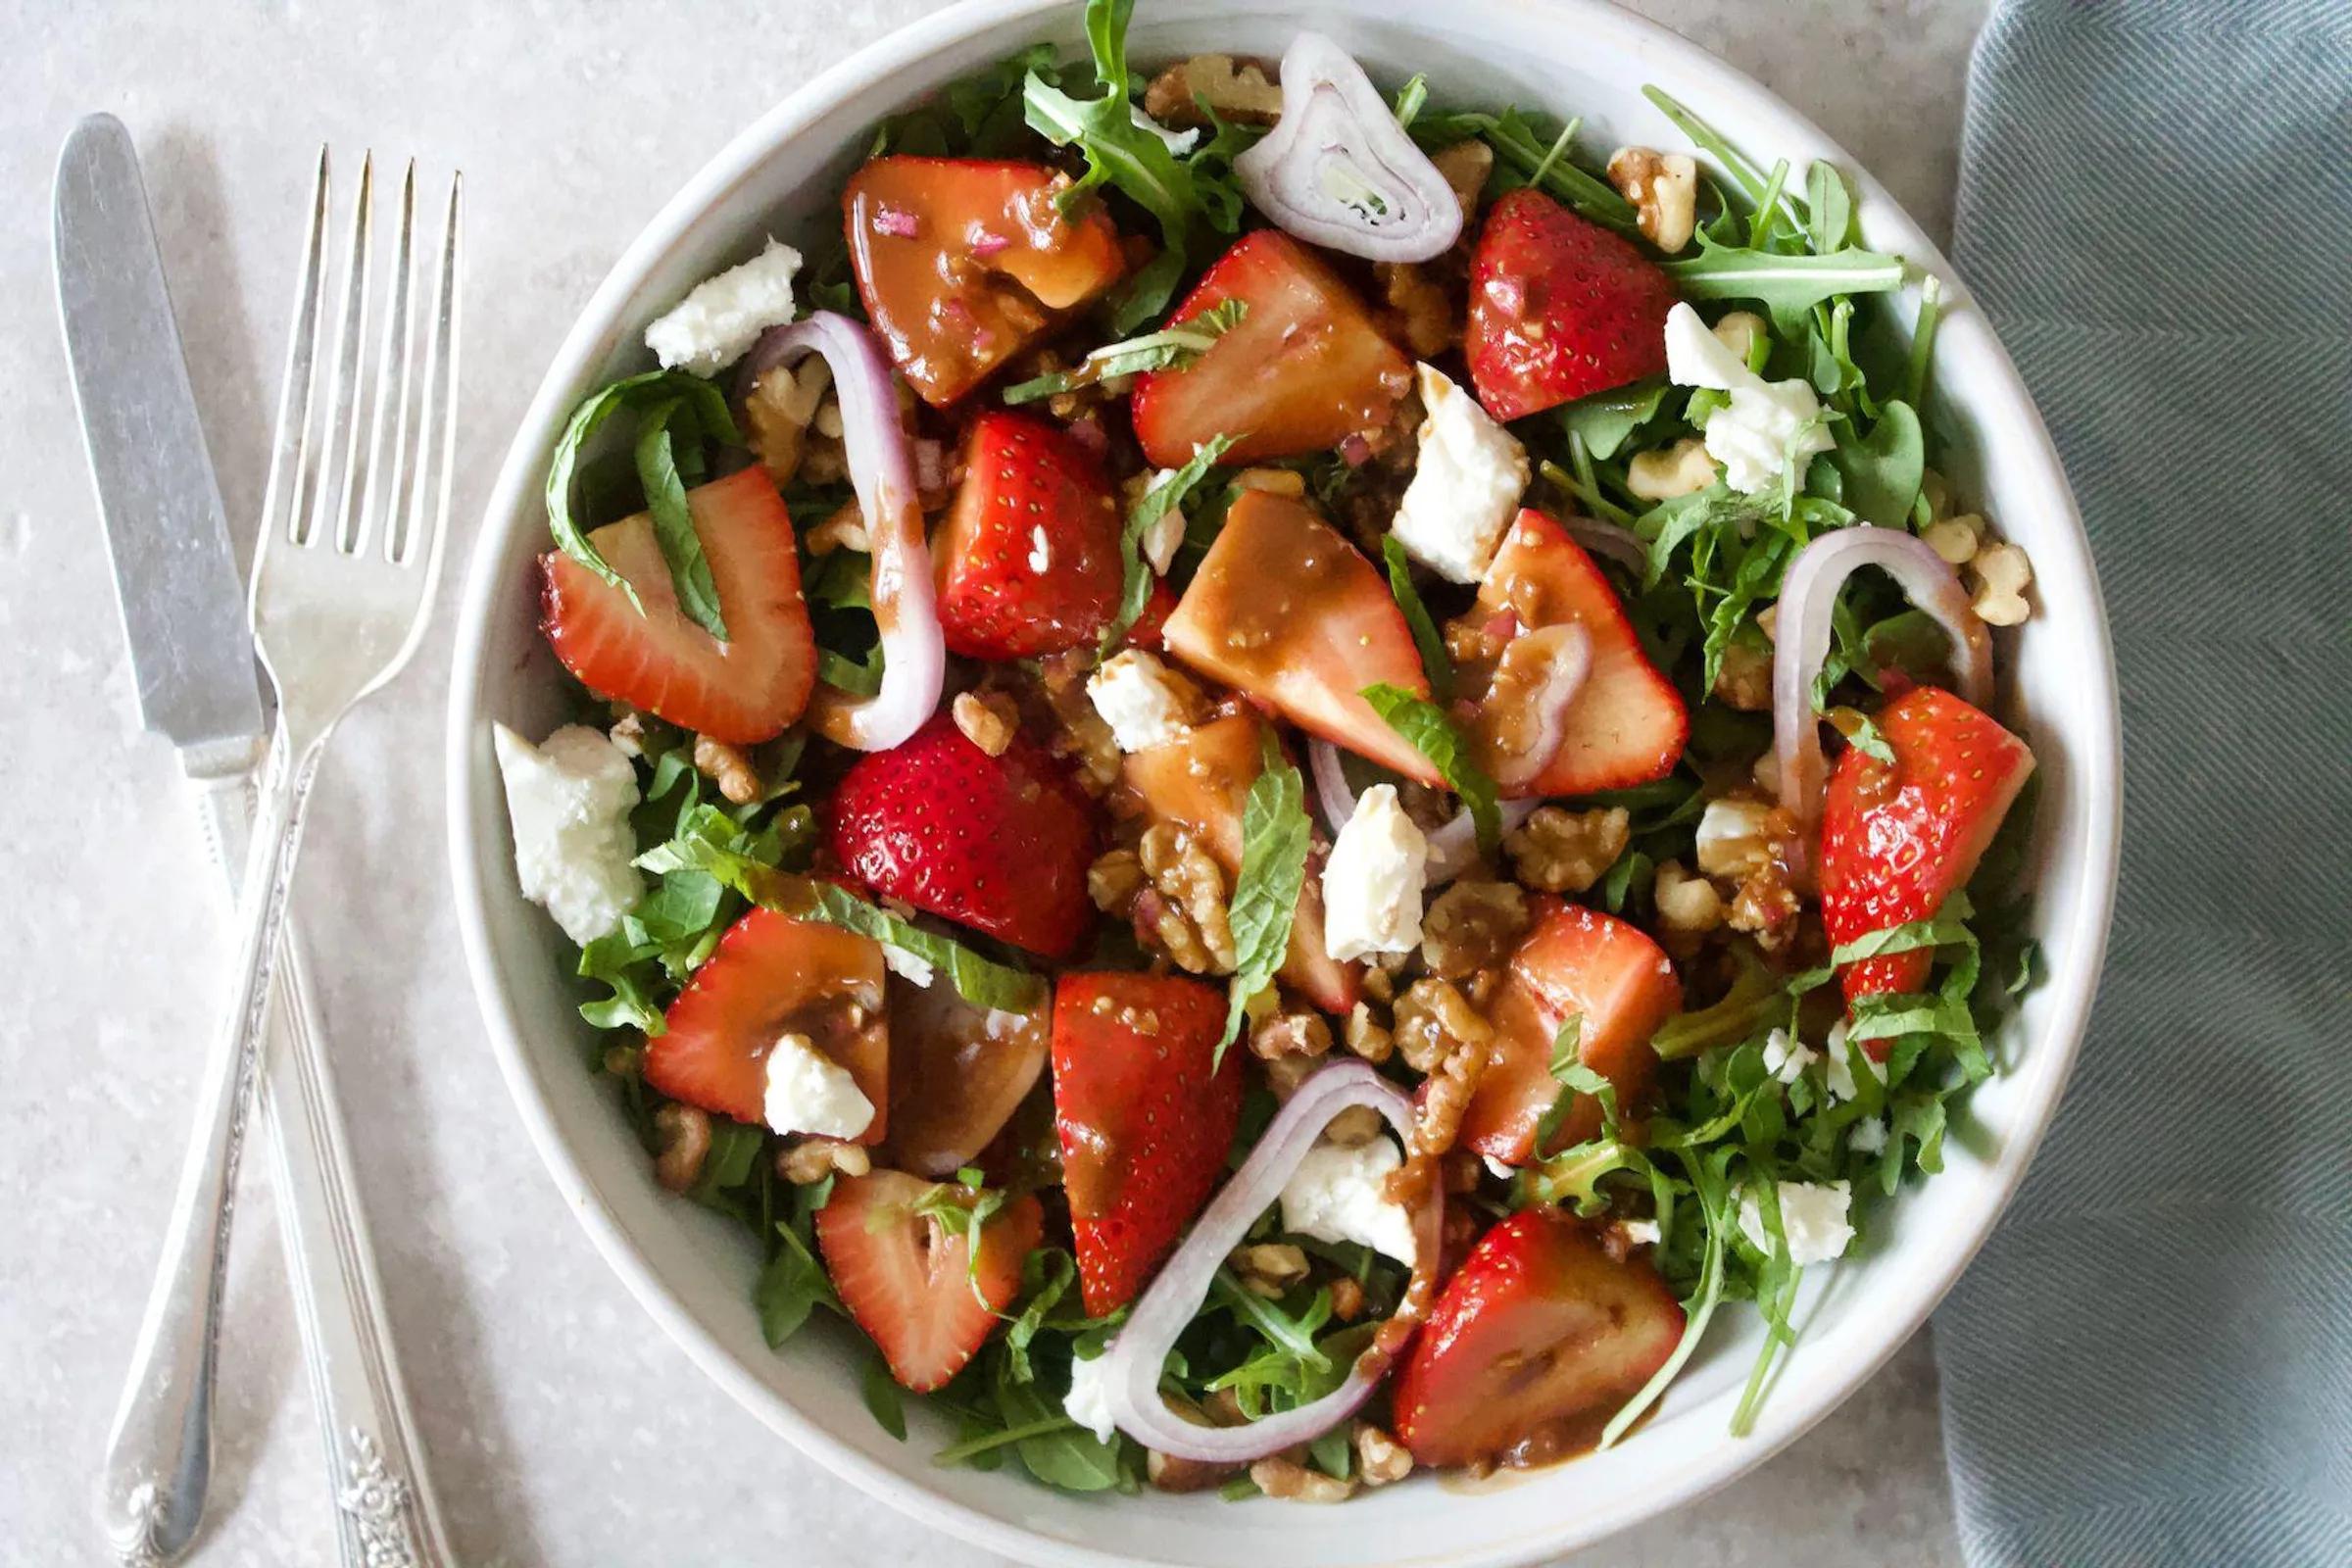 Whip up this sweet-and-savory salad with a balsamic vinaigrette dressing for a deceptively nutritious lunch. (via <a href="https://www.brit.co/spring-salad-recipe/"><strong>Brit + Co.</strong></a>)